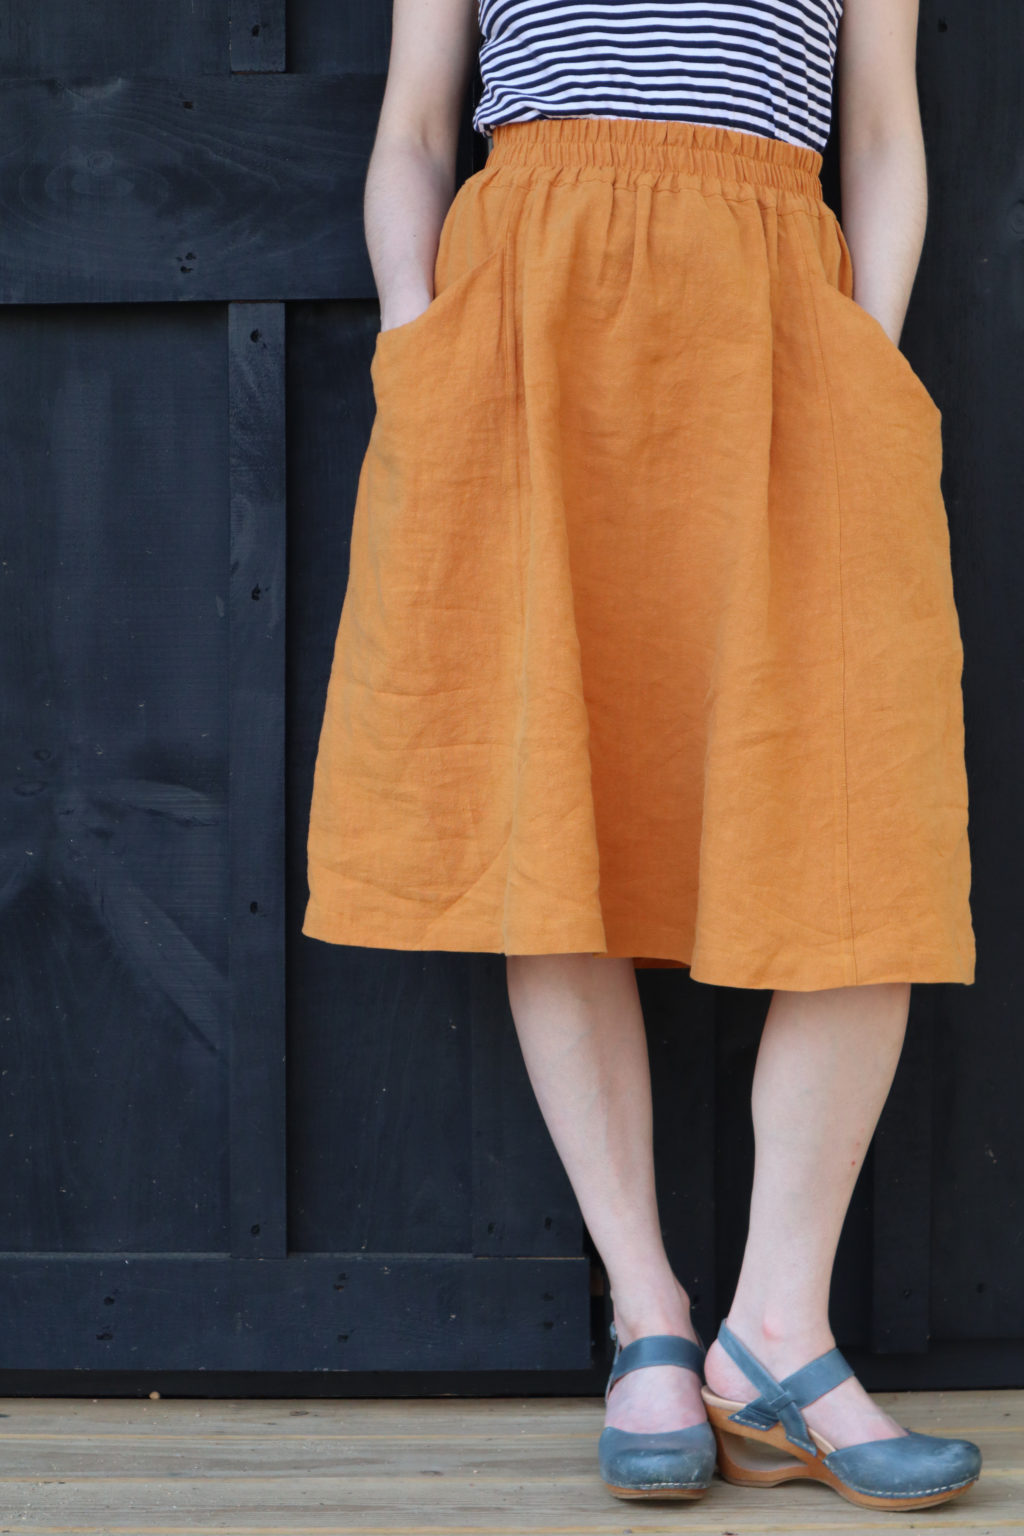 a waist down shot of an orange view A gypsum skirt worn with blue clogs and s triped shirt, against a black wall